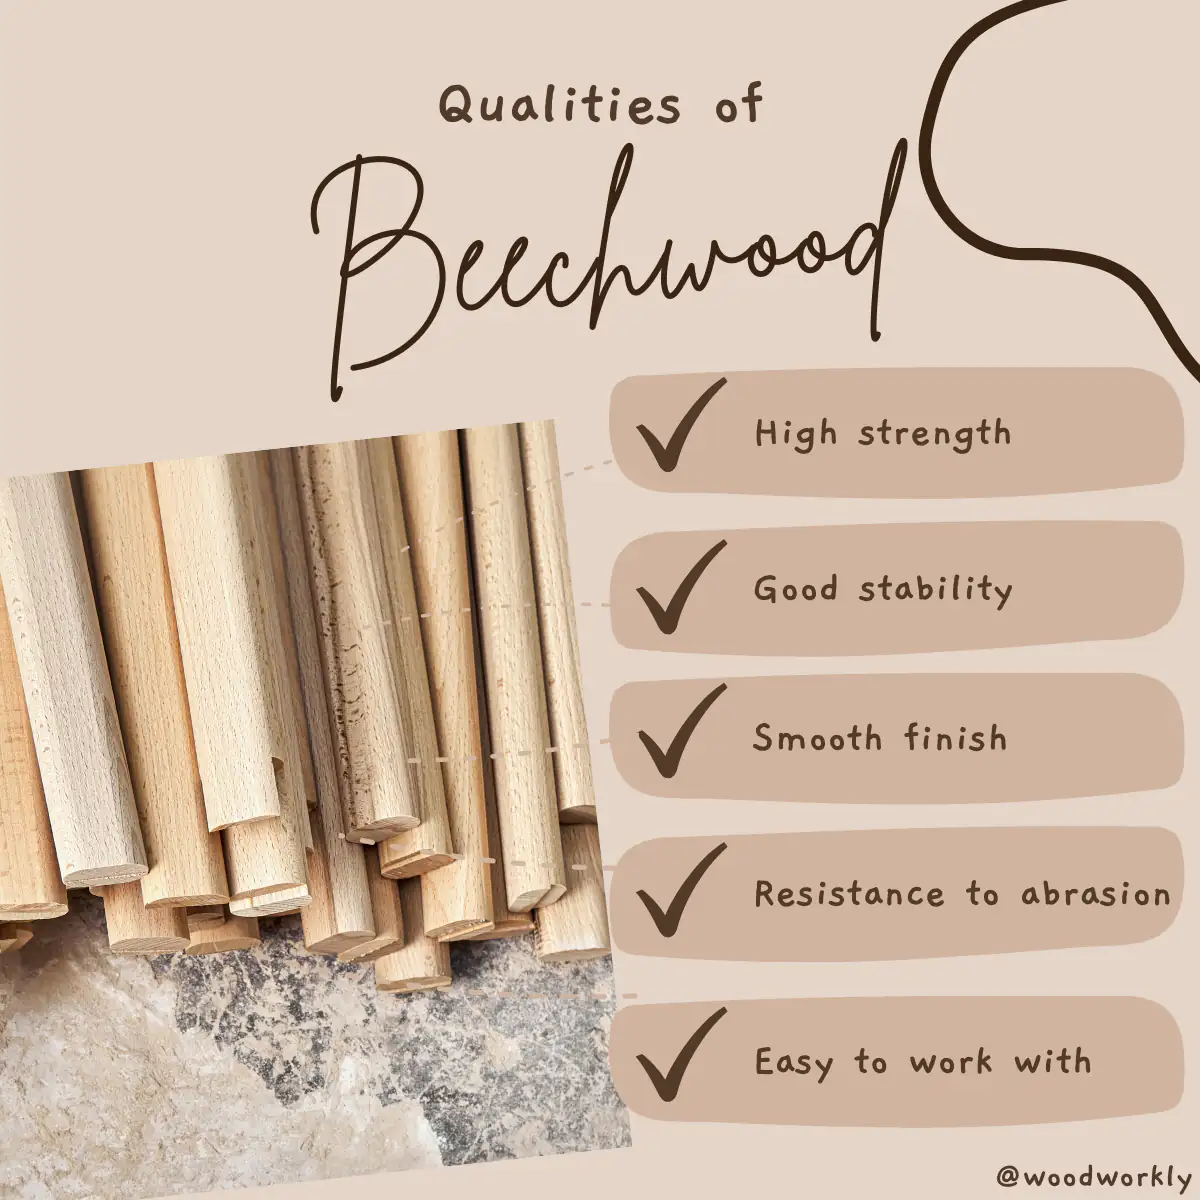 Qualities of Beechwood important when making a bed frame